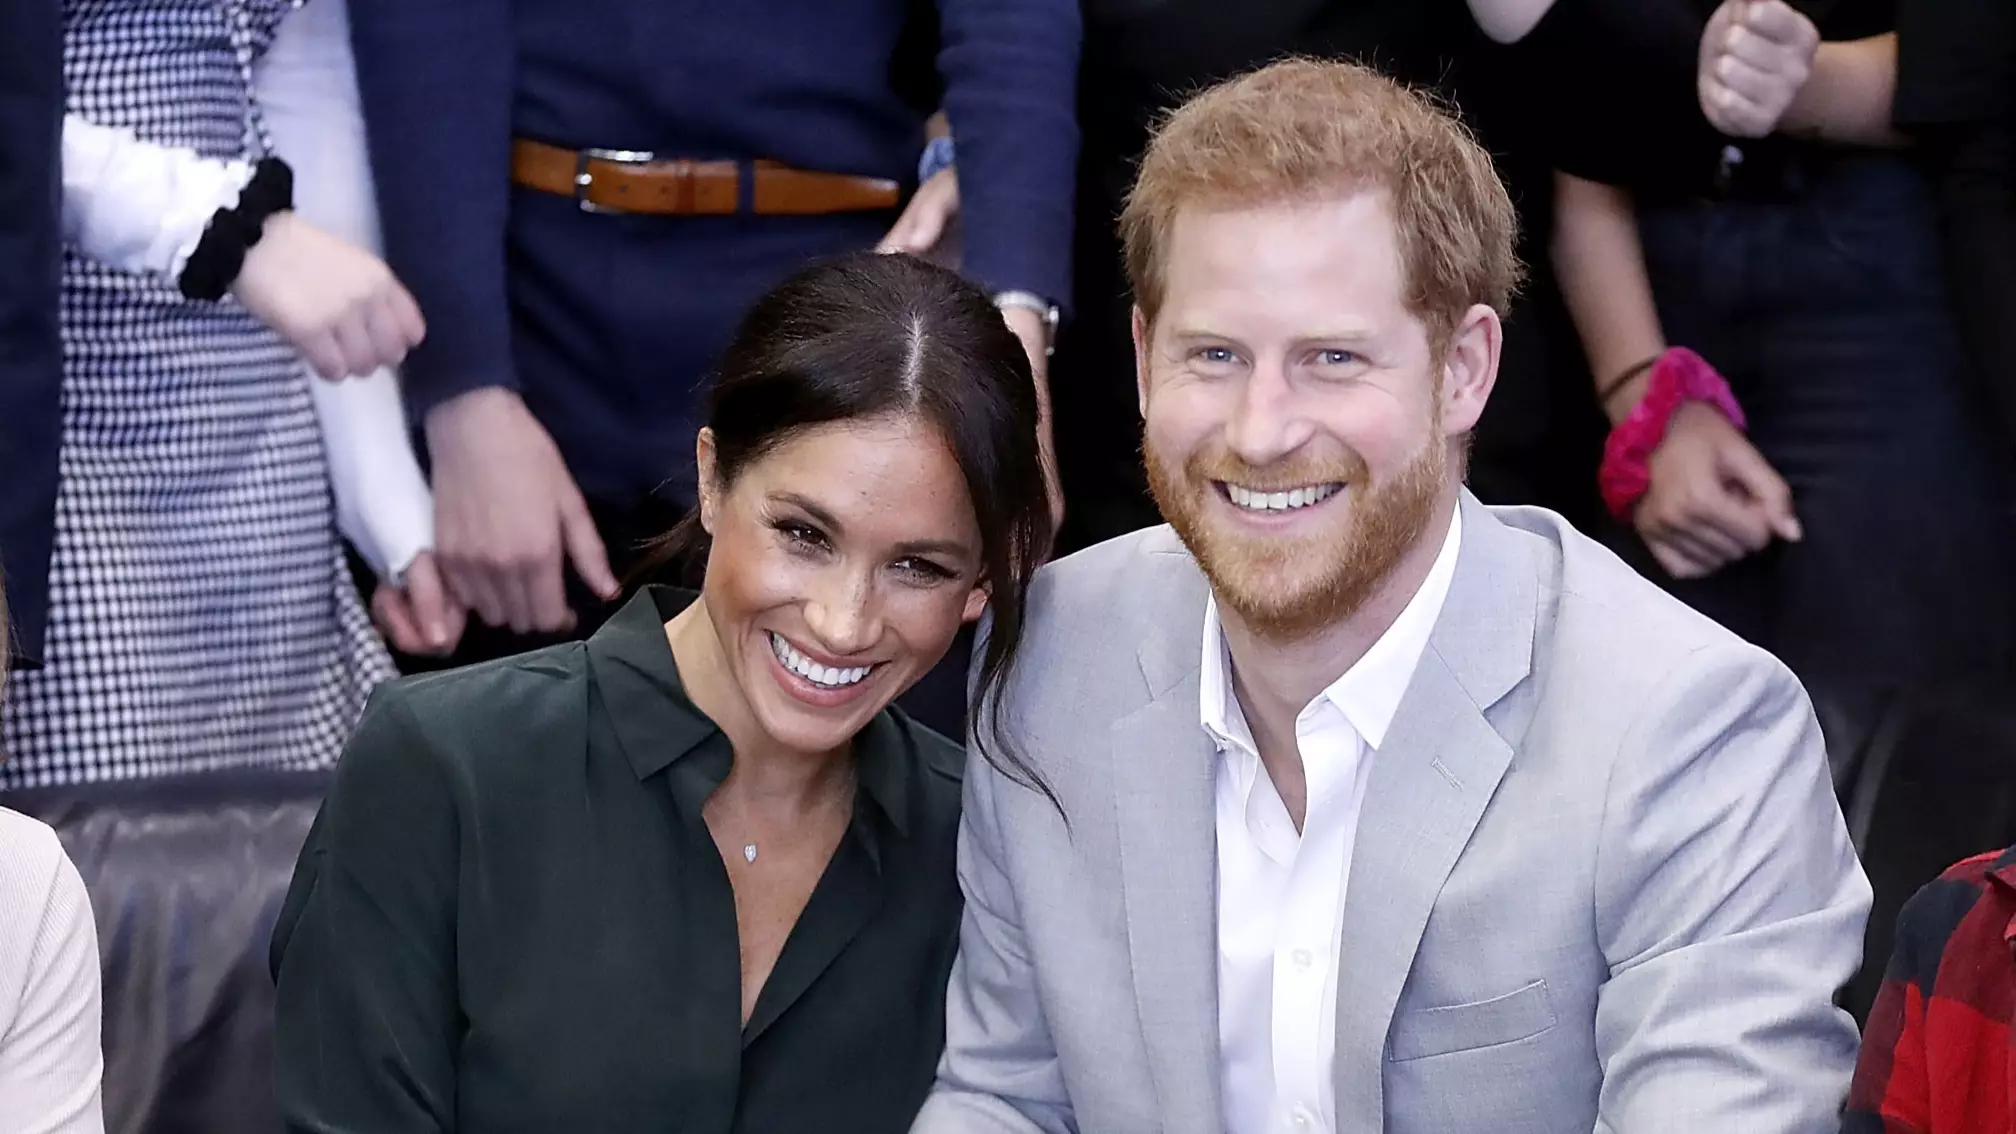 Meghan Markle Already Has An Adorable Gift For Her Unborn Child